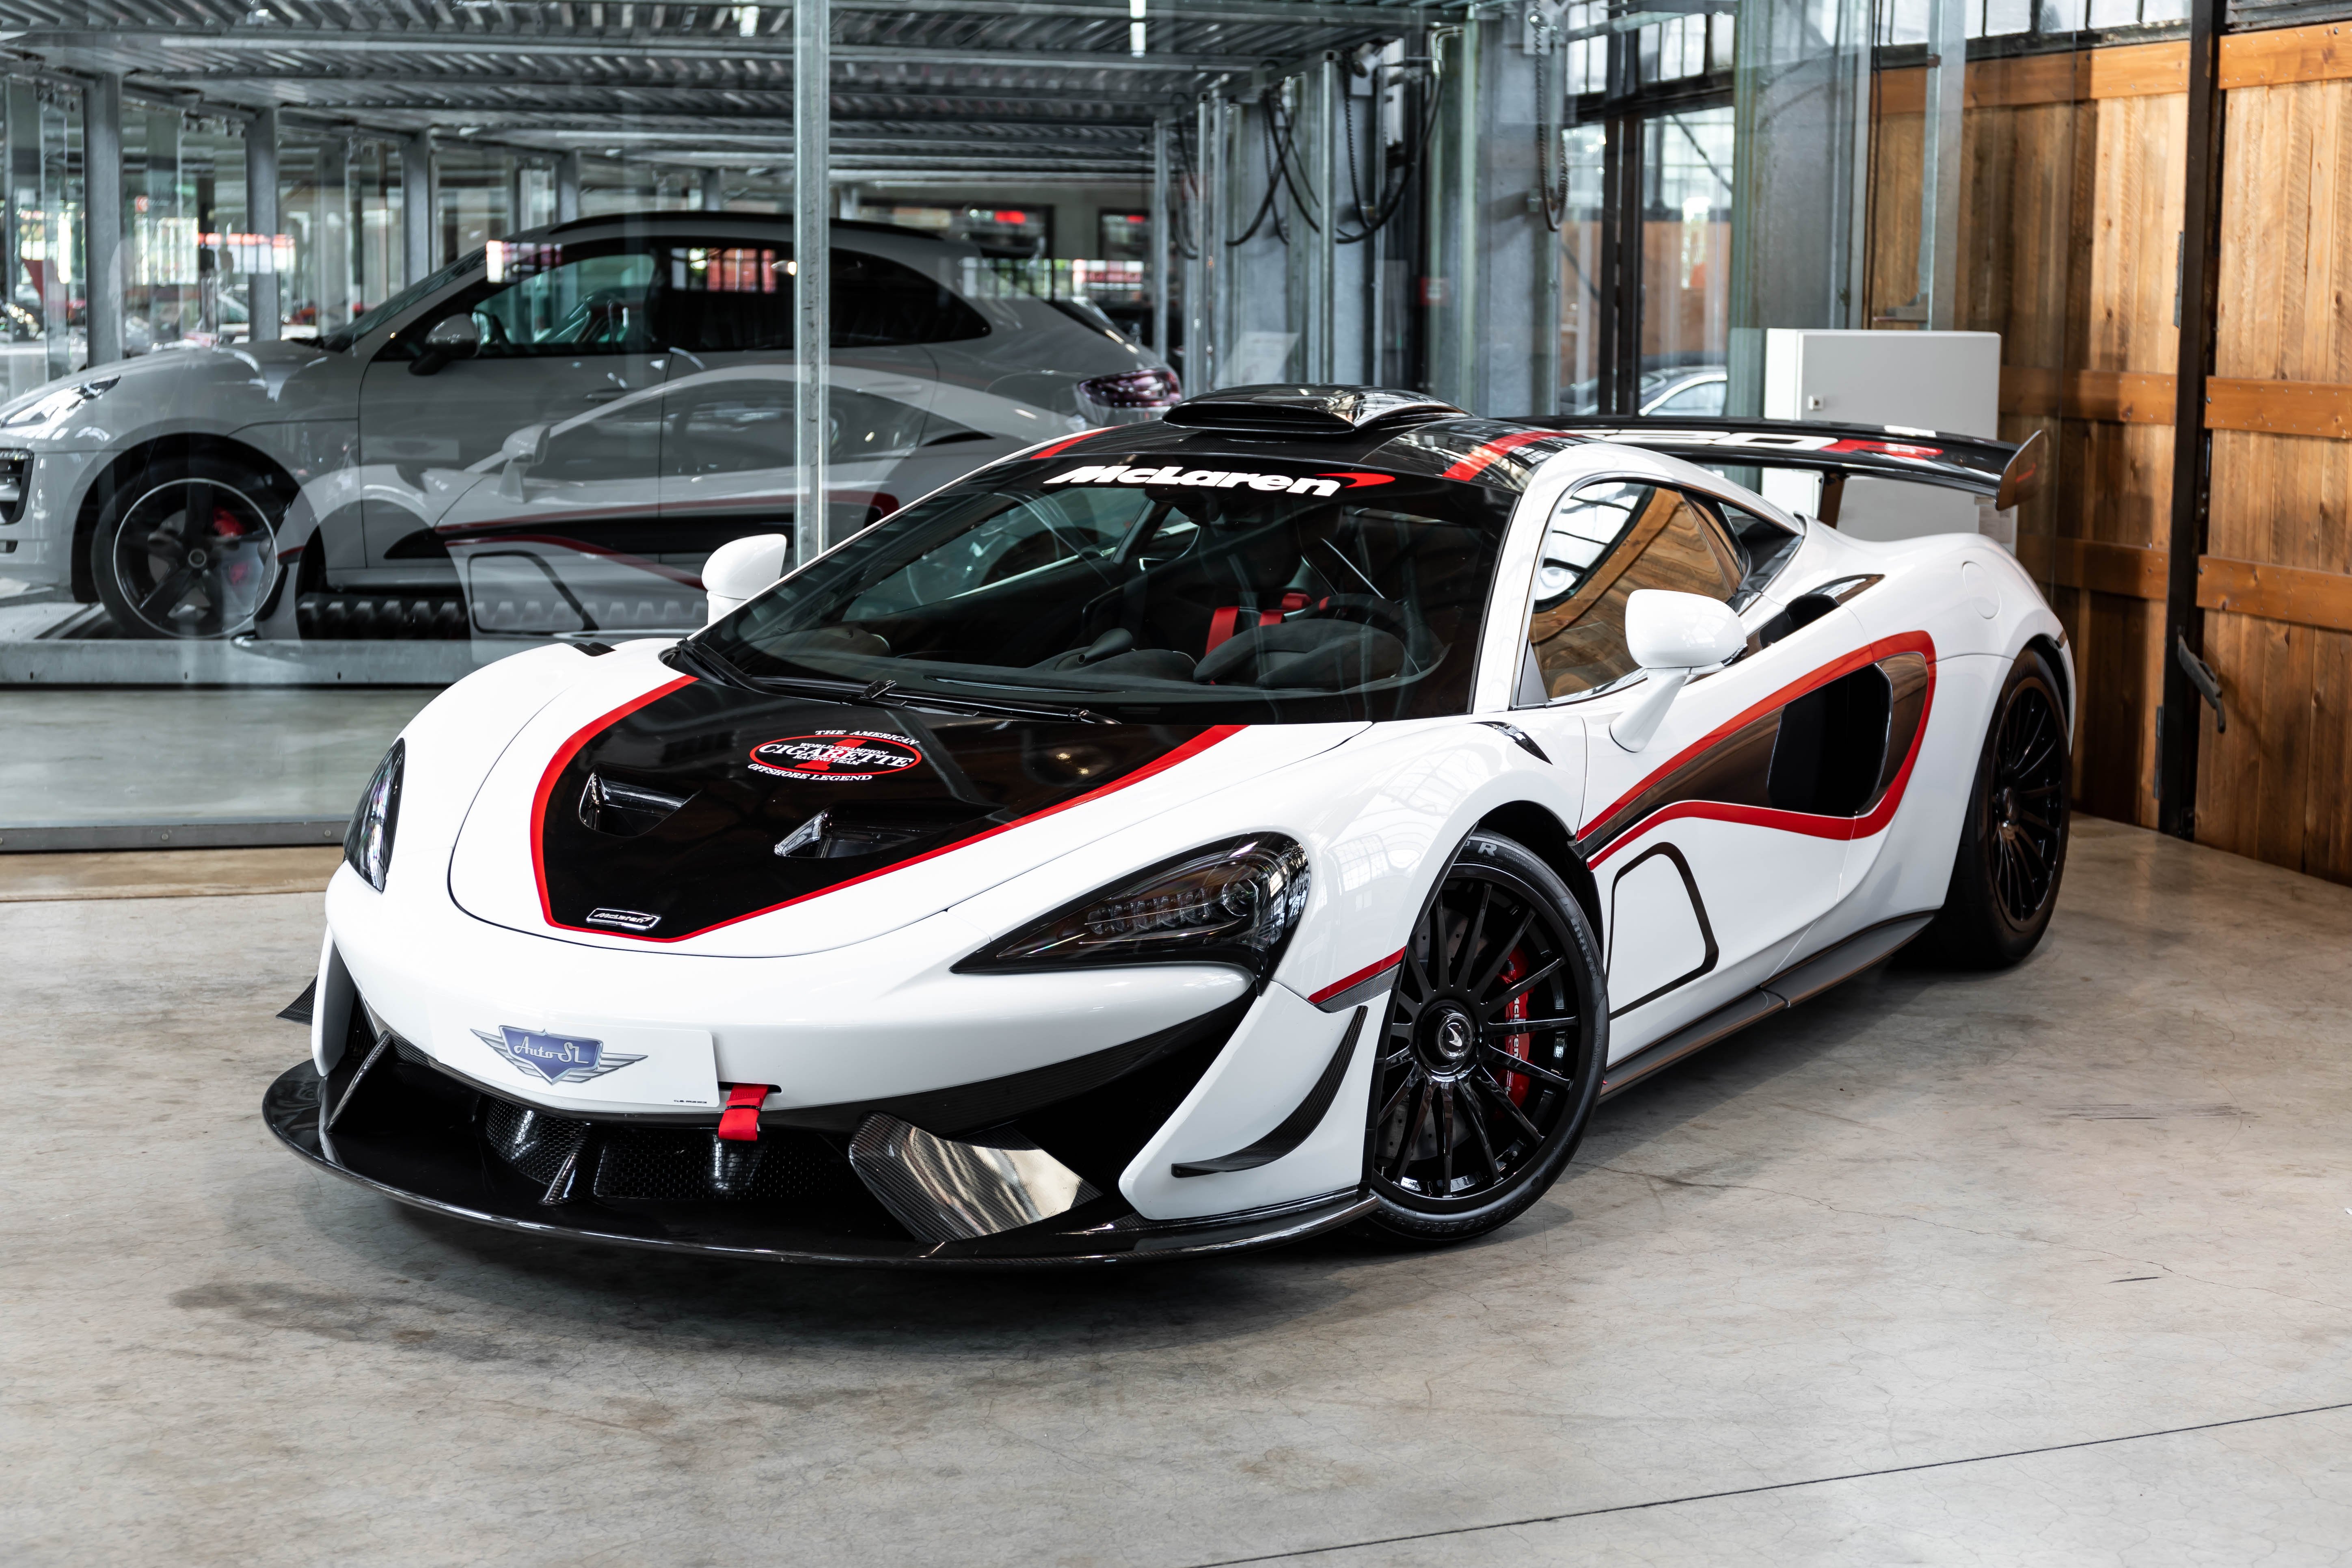 https://www.classicdriver.com/sites/default/files/users/116317/cars_images/116317-994388-car-20231230_131228-autosl_-_mclaren_620r_weiss_-_mobile_-11.jpg